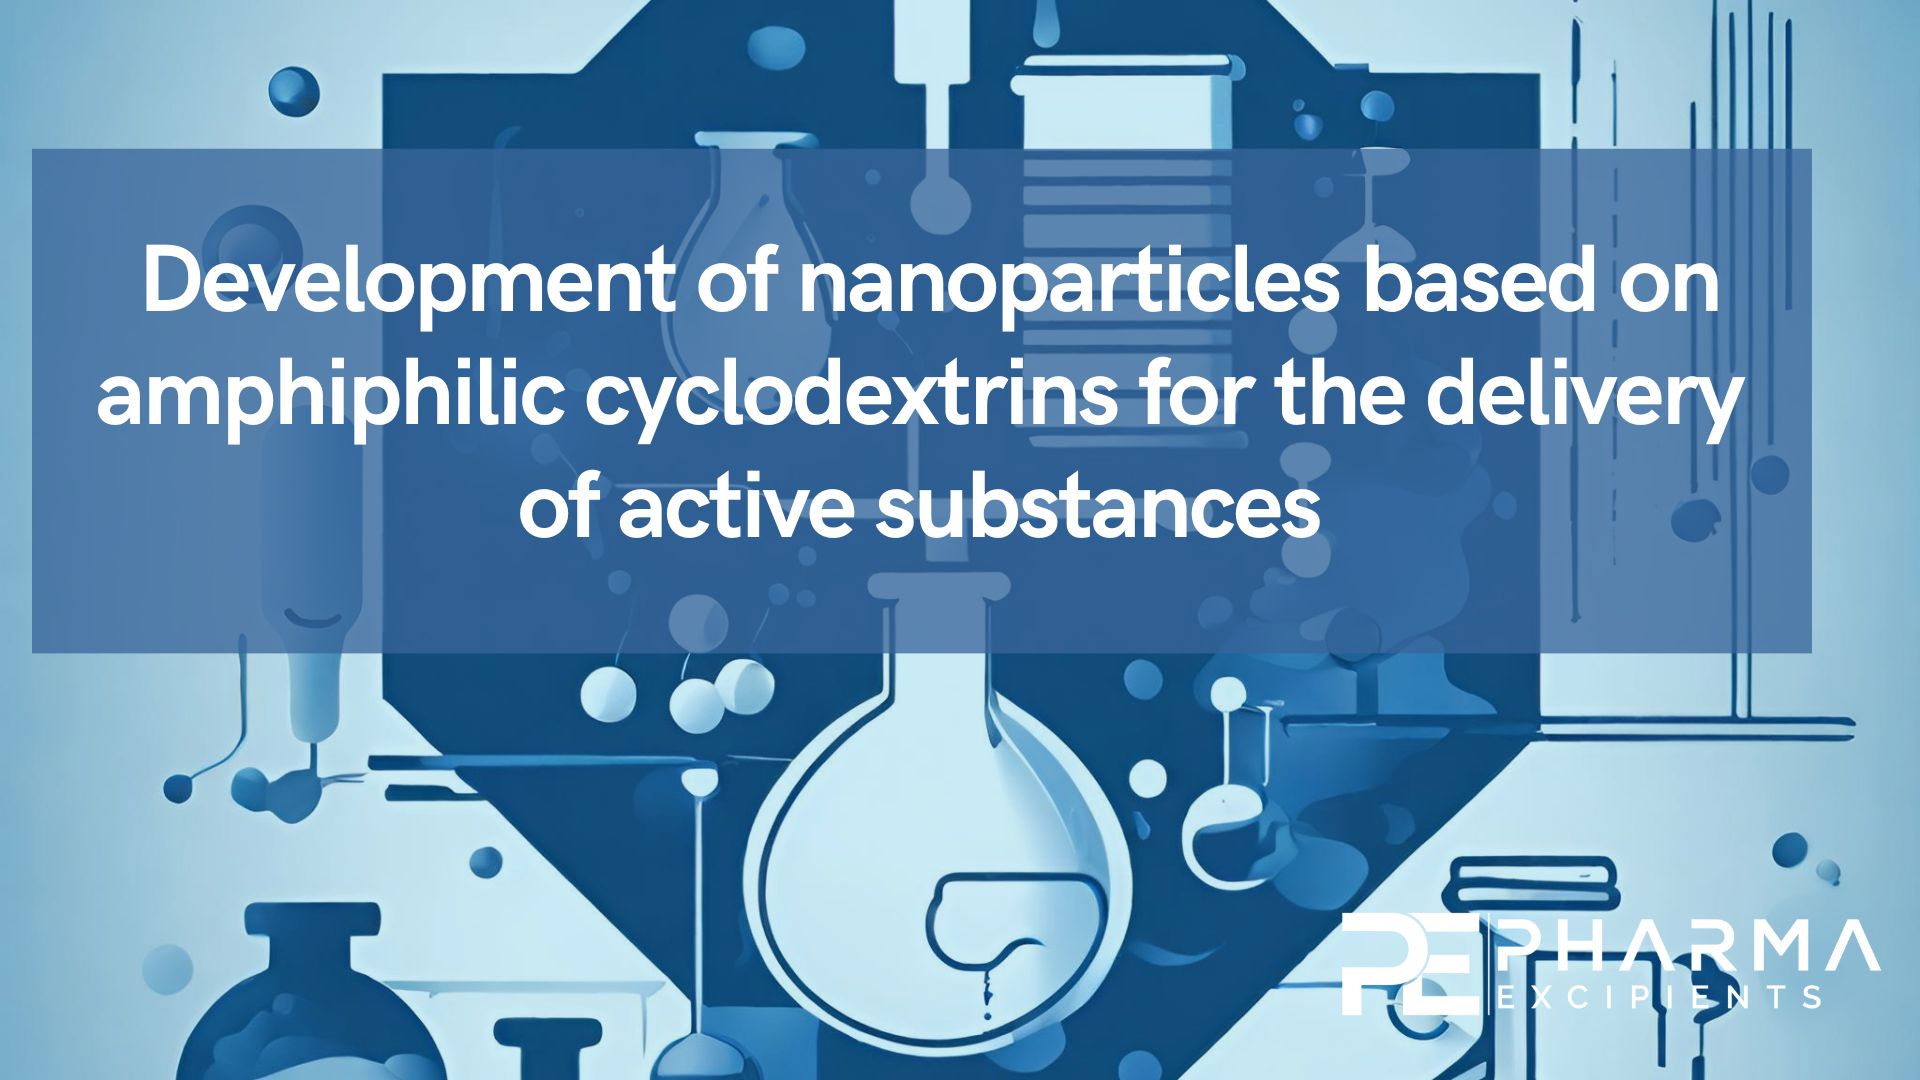 Development of nanoparticles based on amphiphilic cyclodextrins for the delivery of active substances